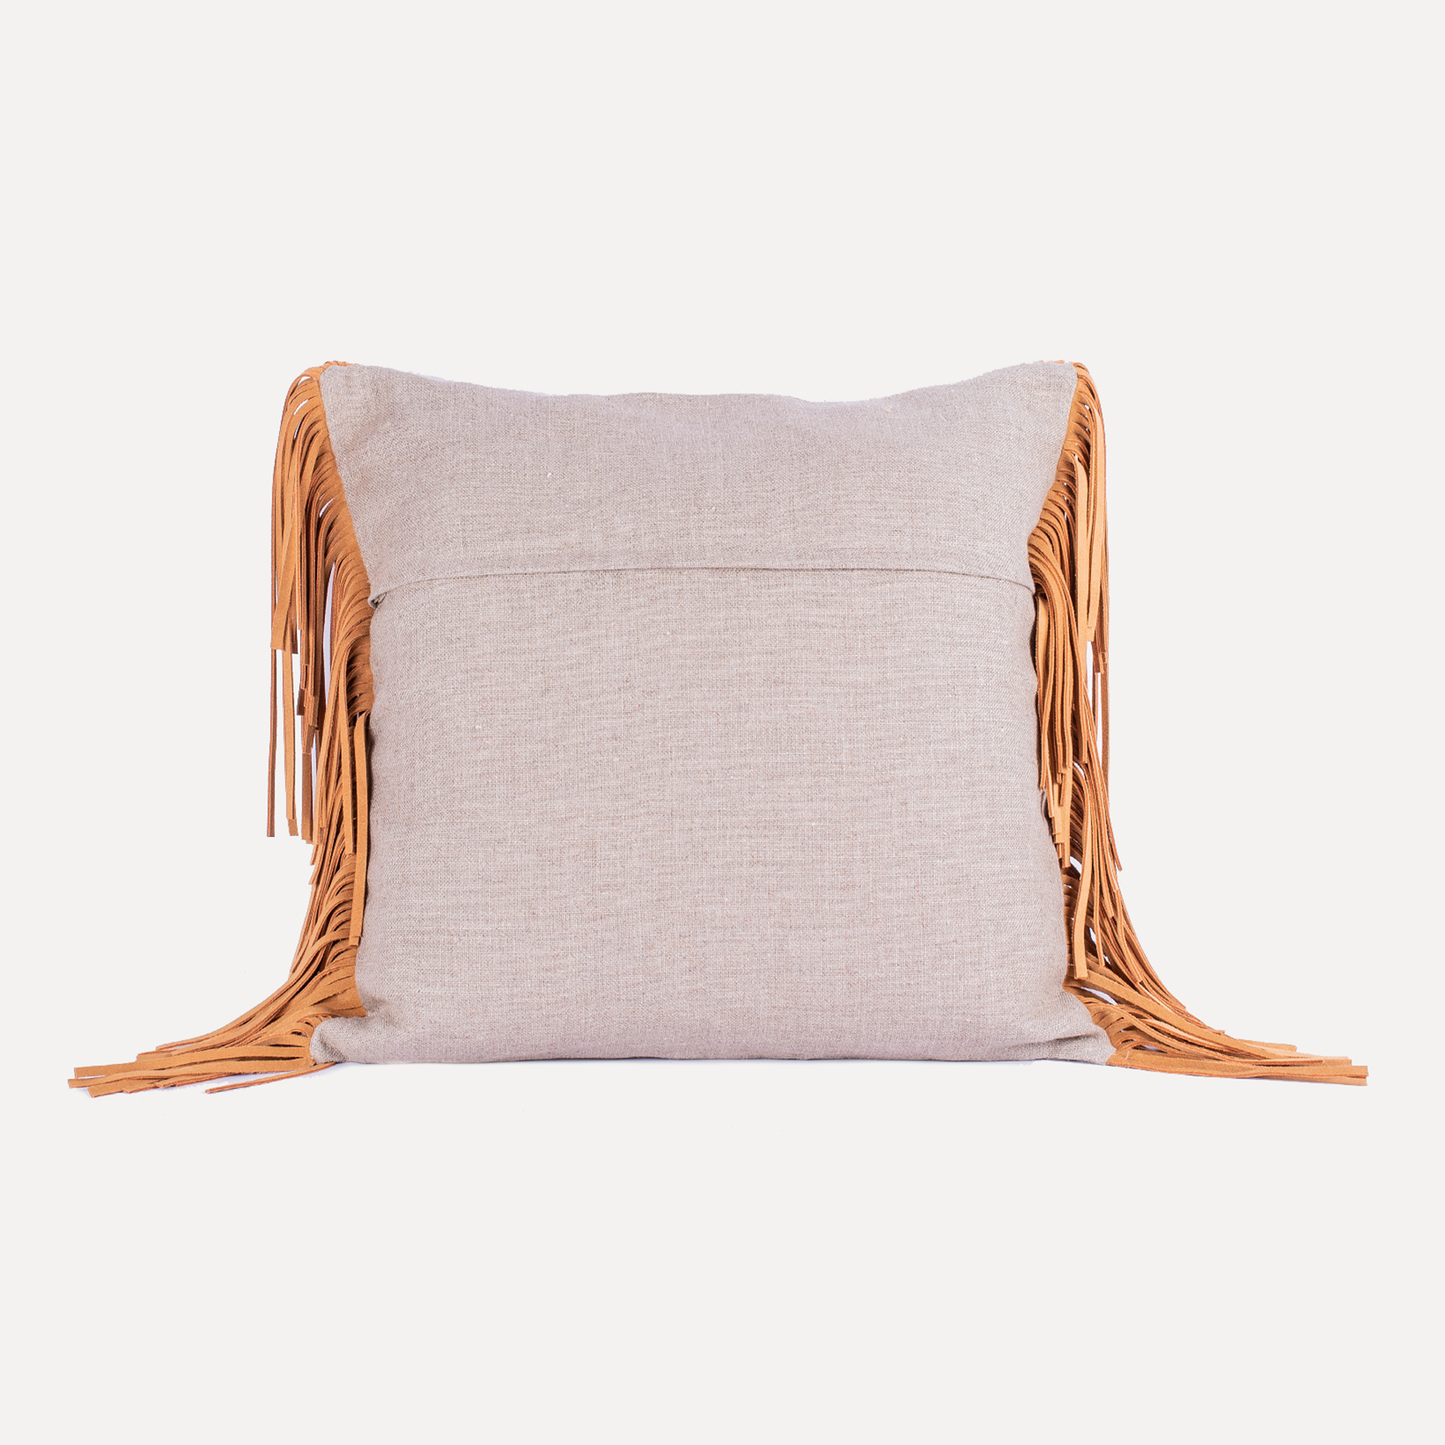 Podence - cushion with leather fringes in mustard